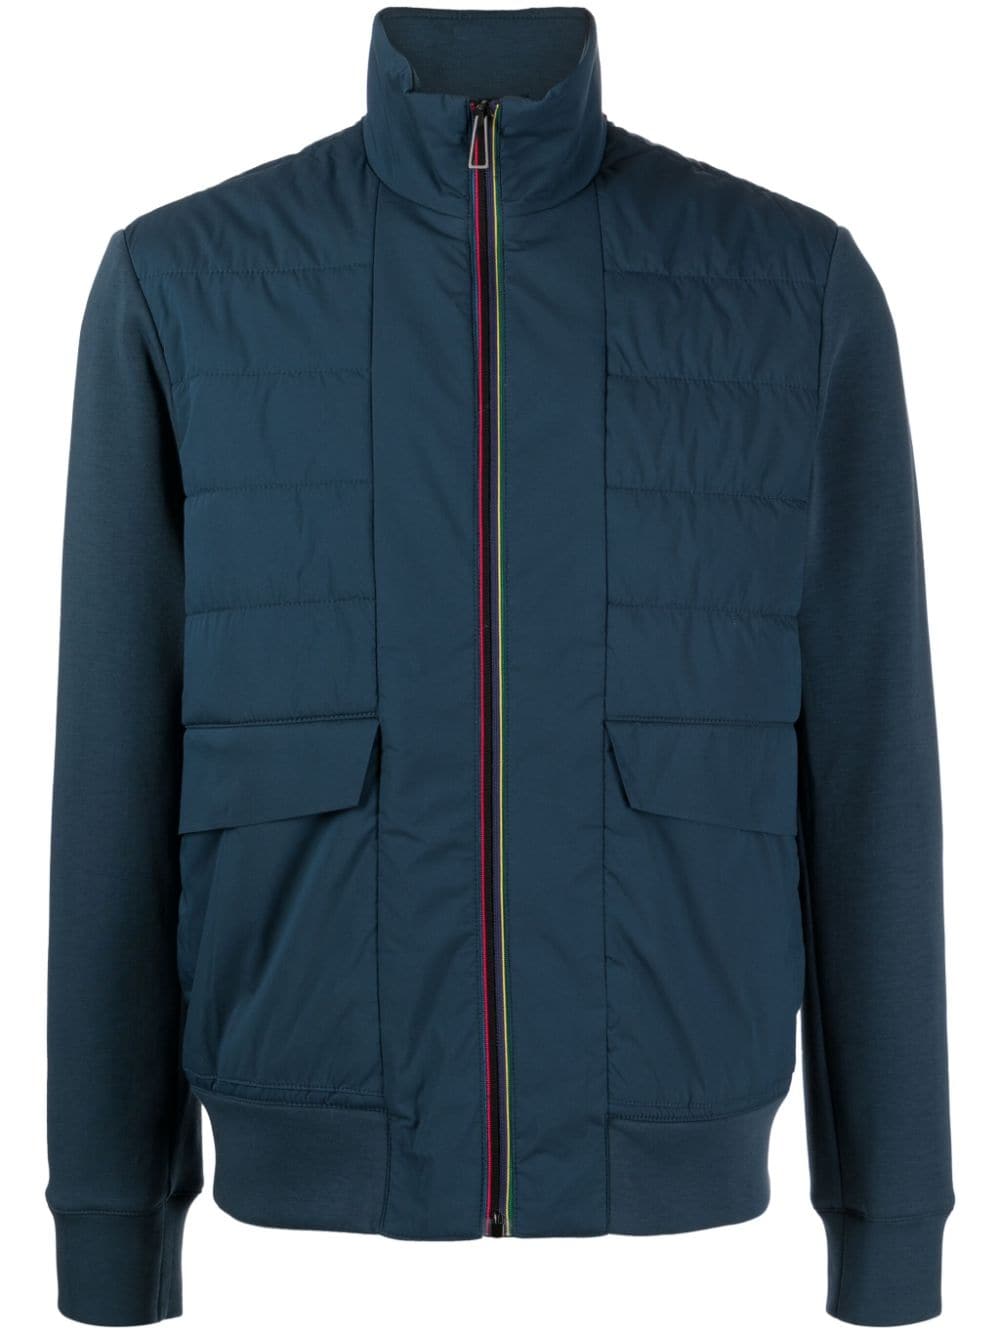 PS Paul Smith quilted zip jacket - Blue von PS Paul Smith